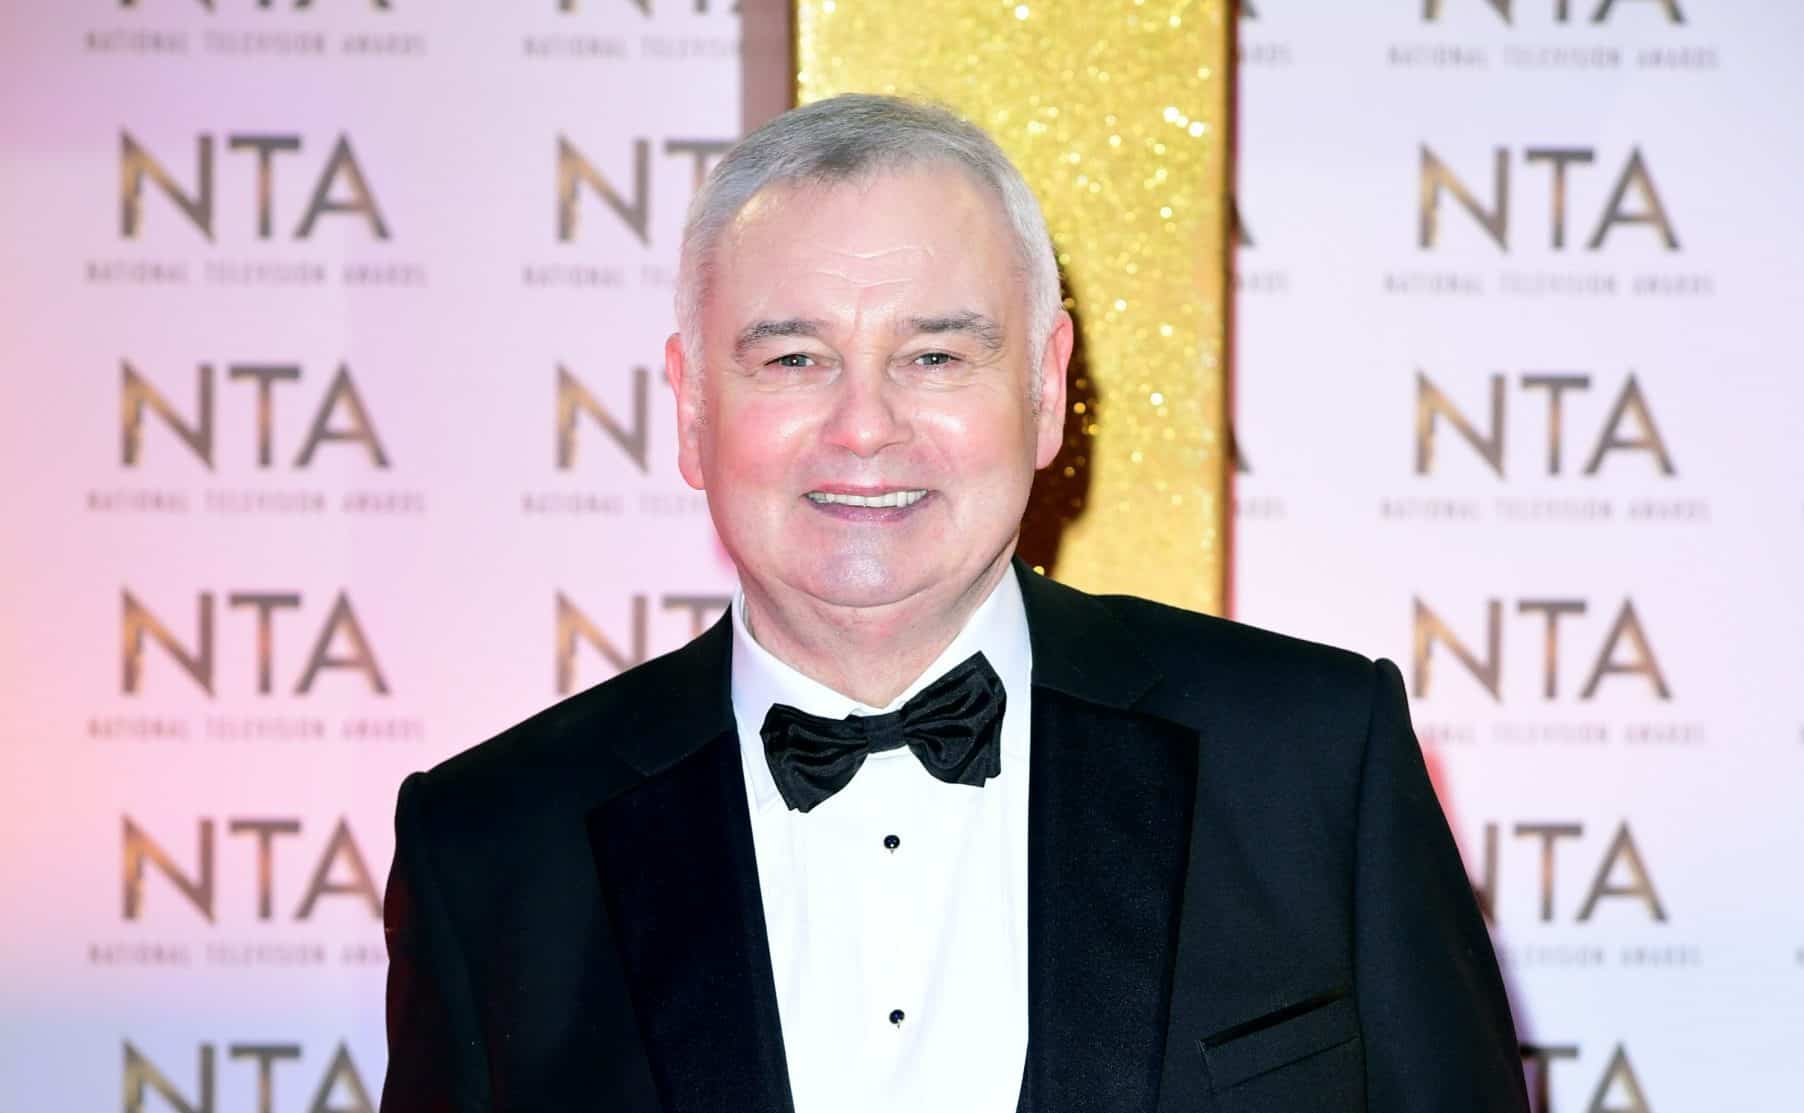 Reaction as Eamonn Holmes poised to join GB News